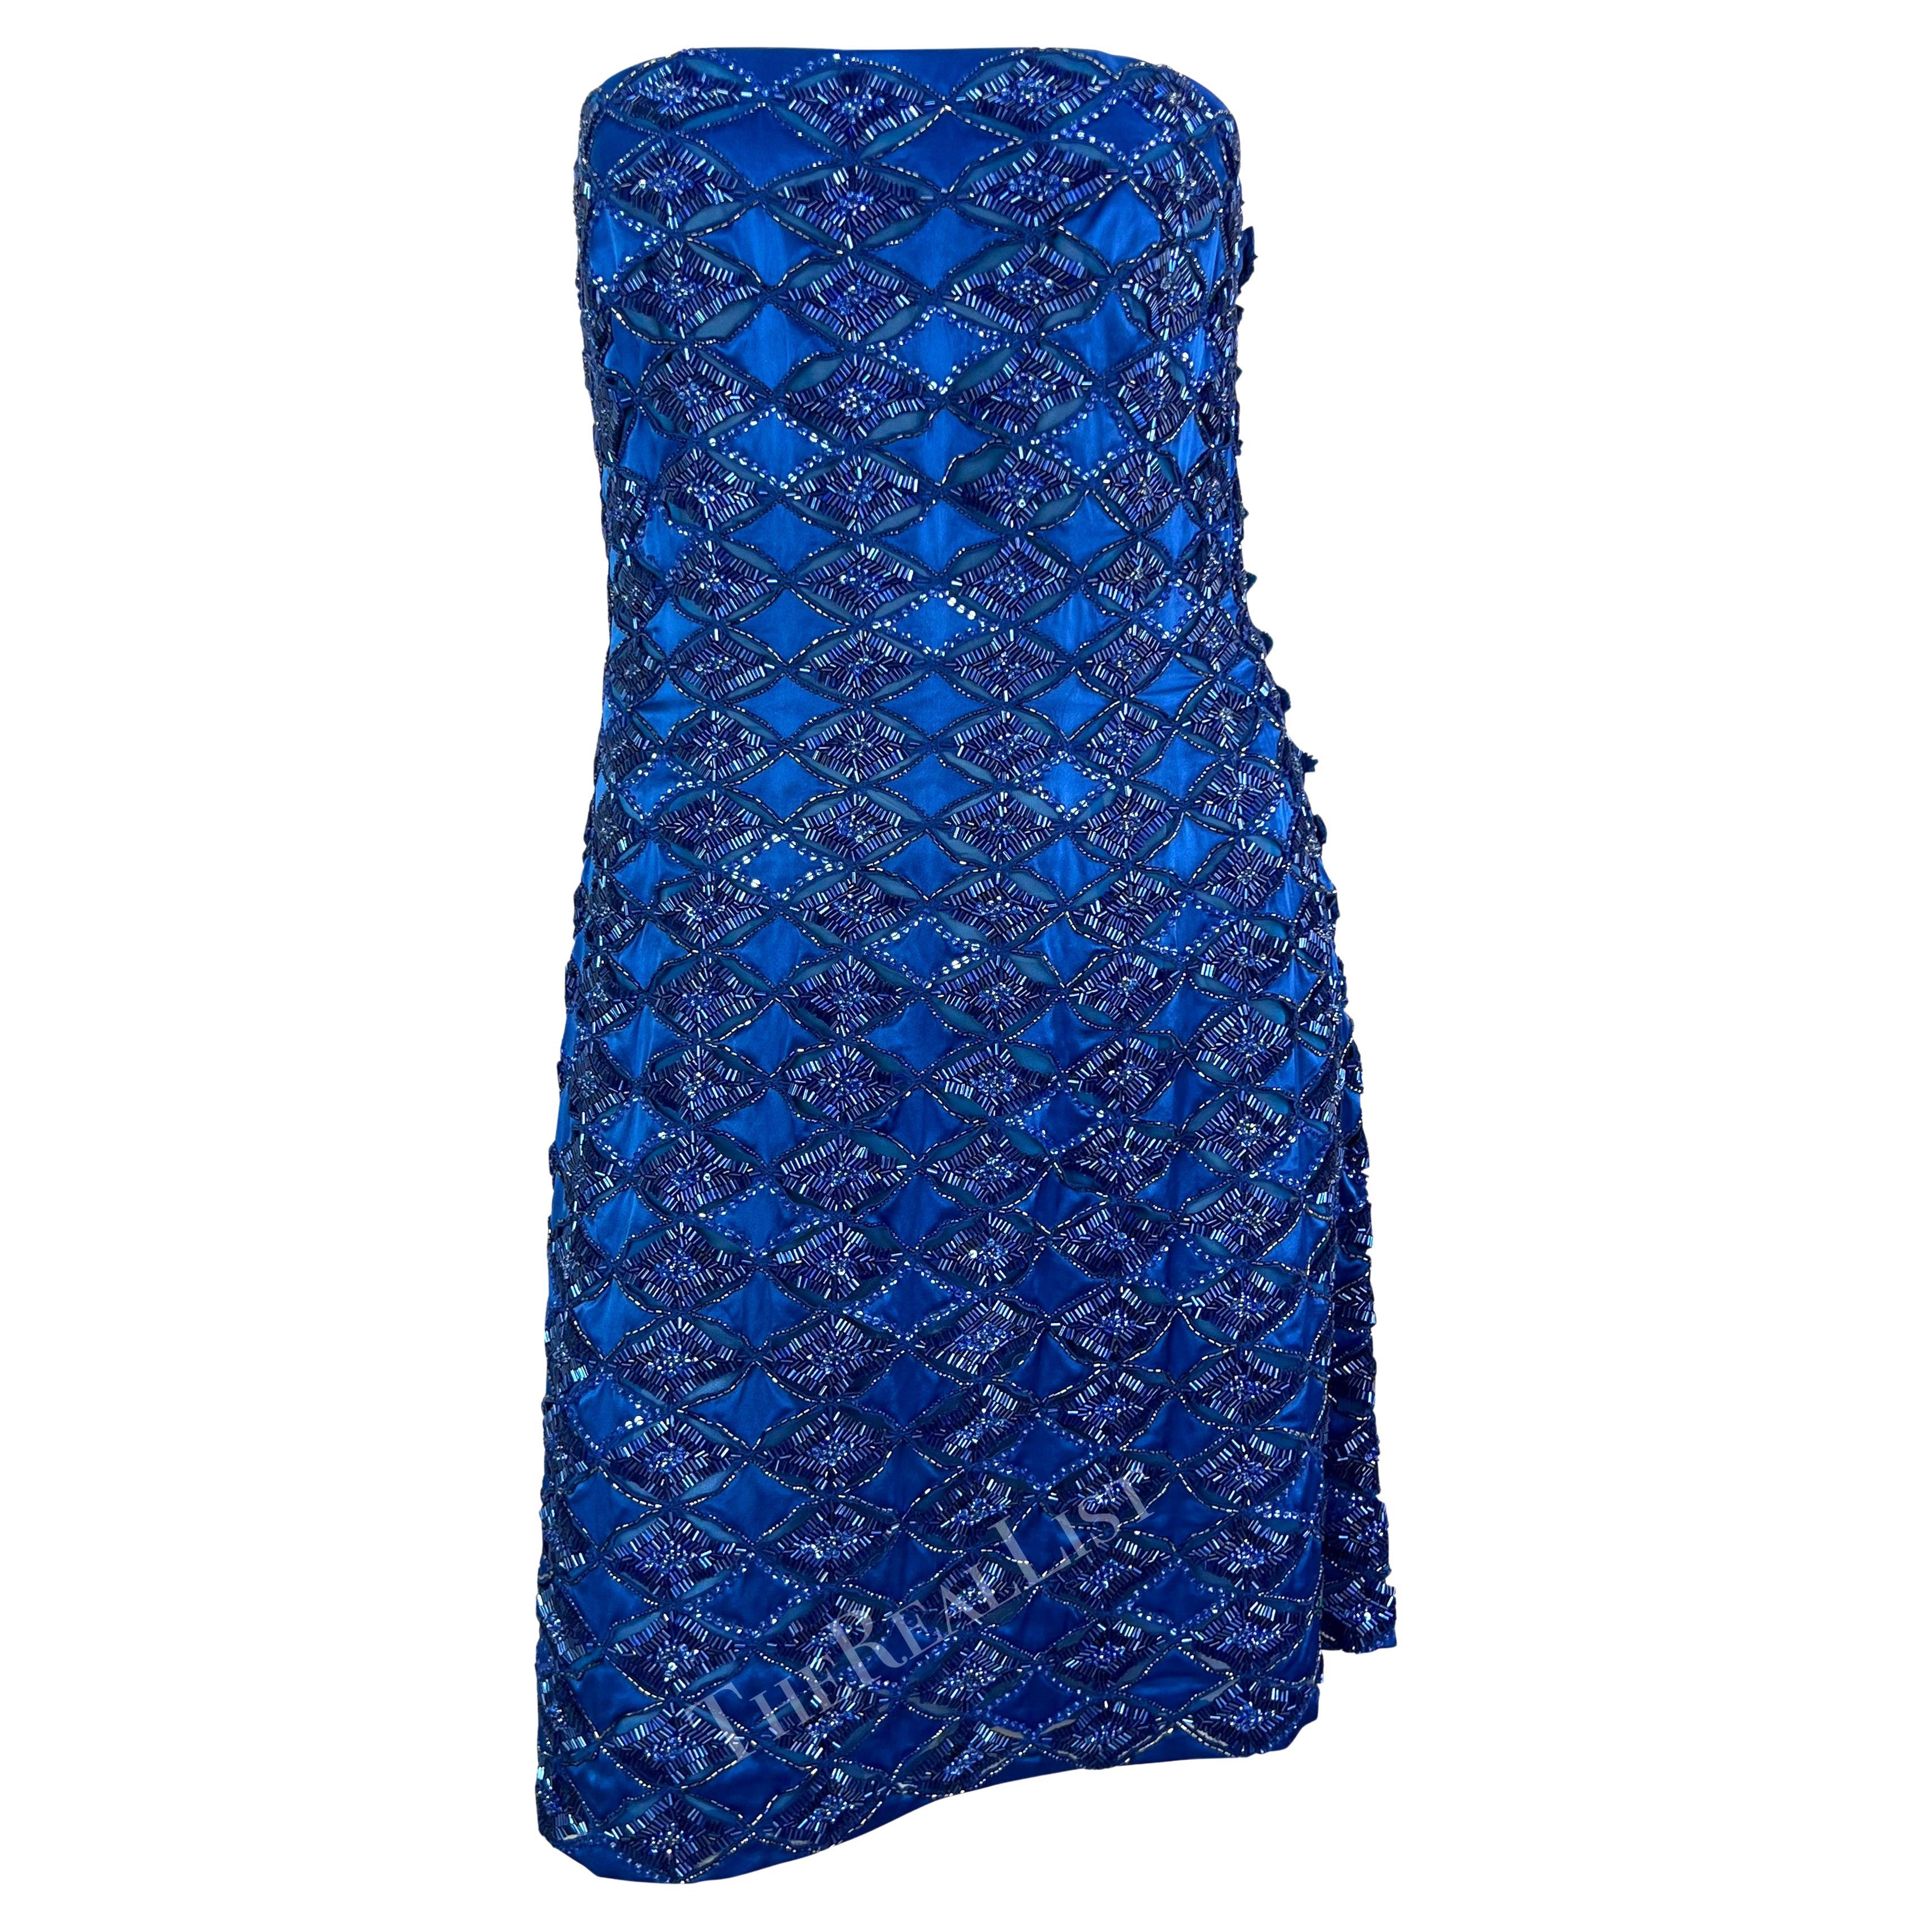 S/S 2001 Atelier Versace by Donatella Runway Blue Beaded Strapless Mini Dress For Sale